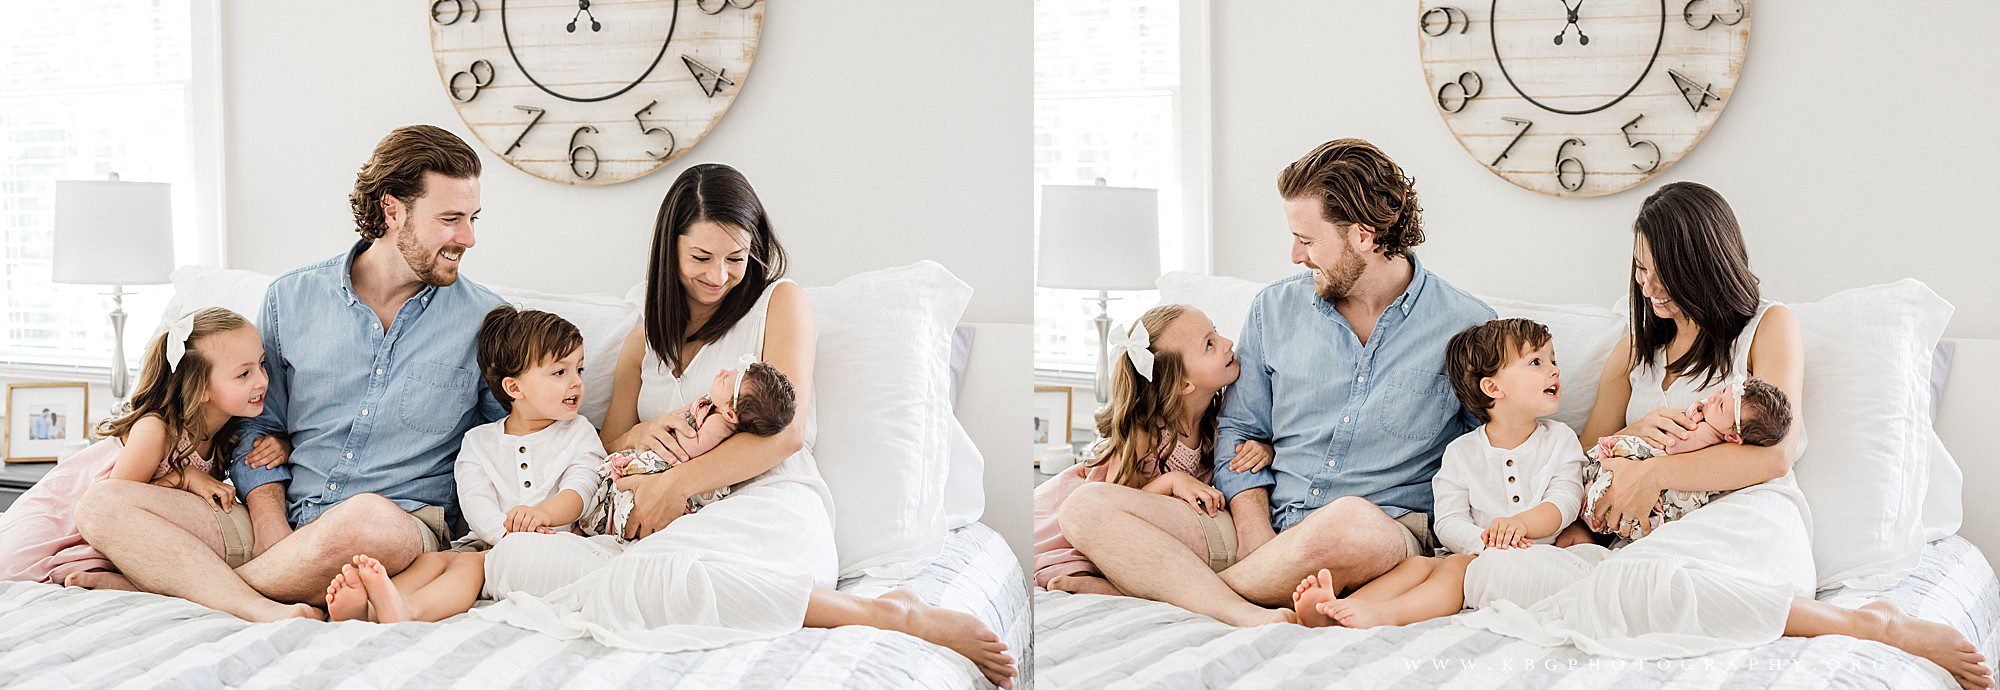 kennesaw baby photographer - family holding newborn baby girl on bed 